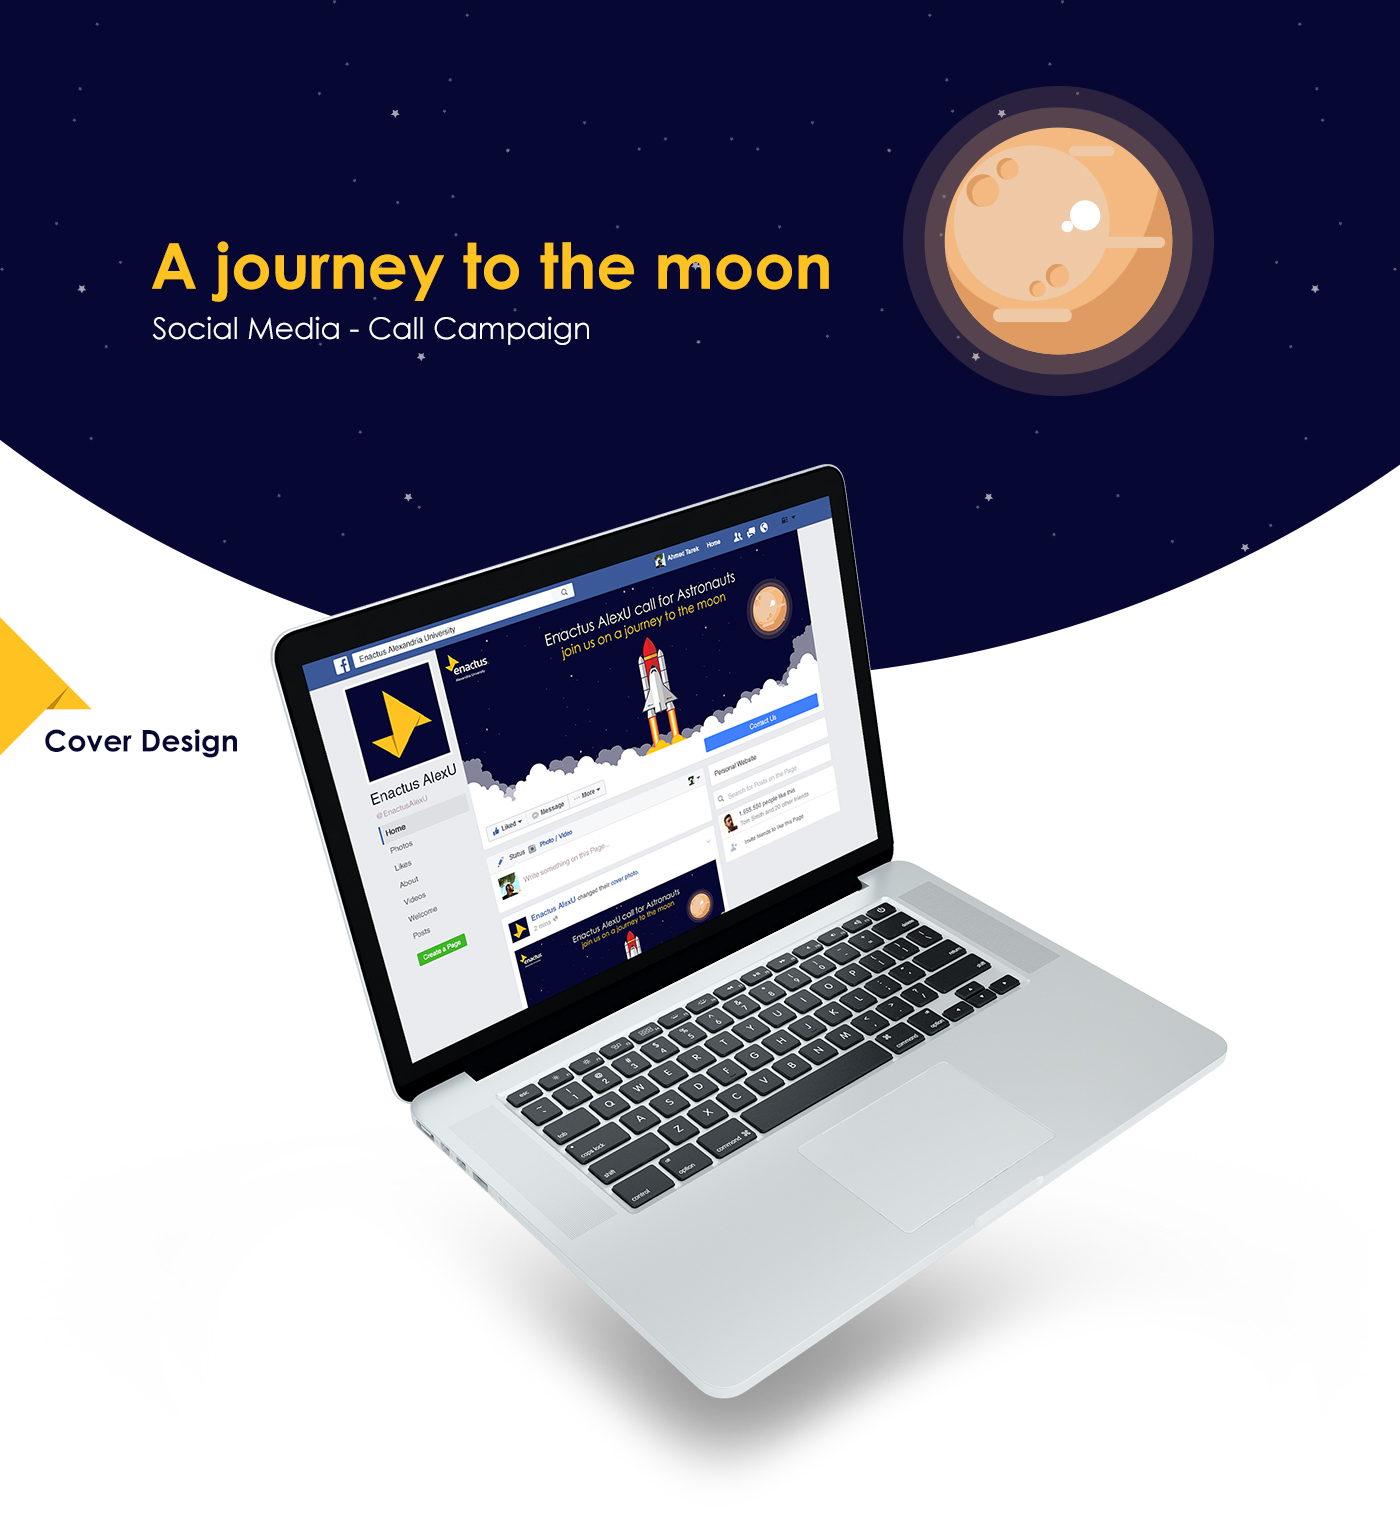 social media moon journey campaign Advertising  astronaut Space 